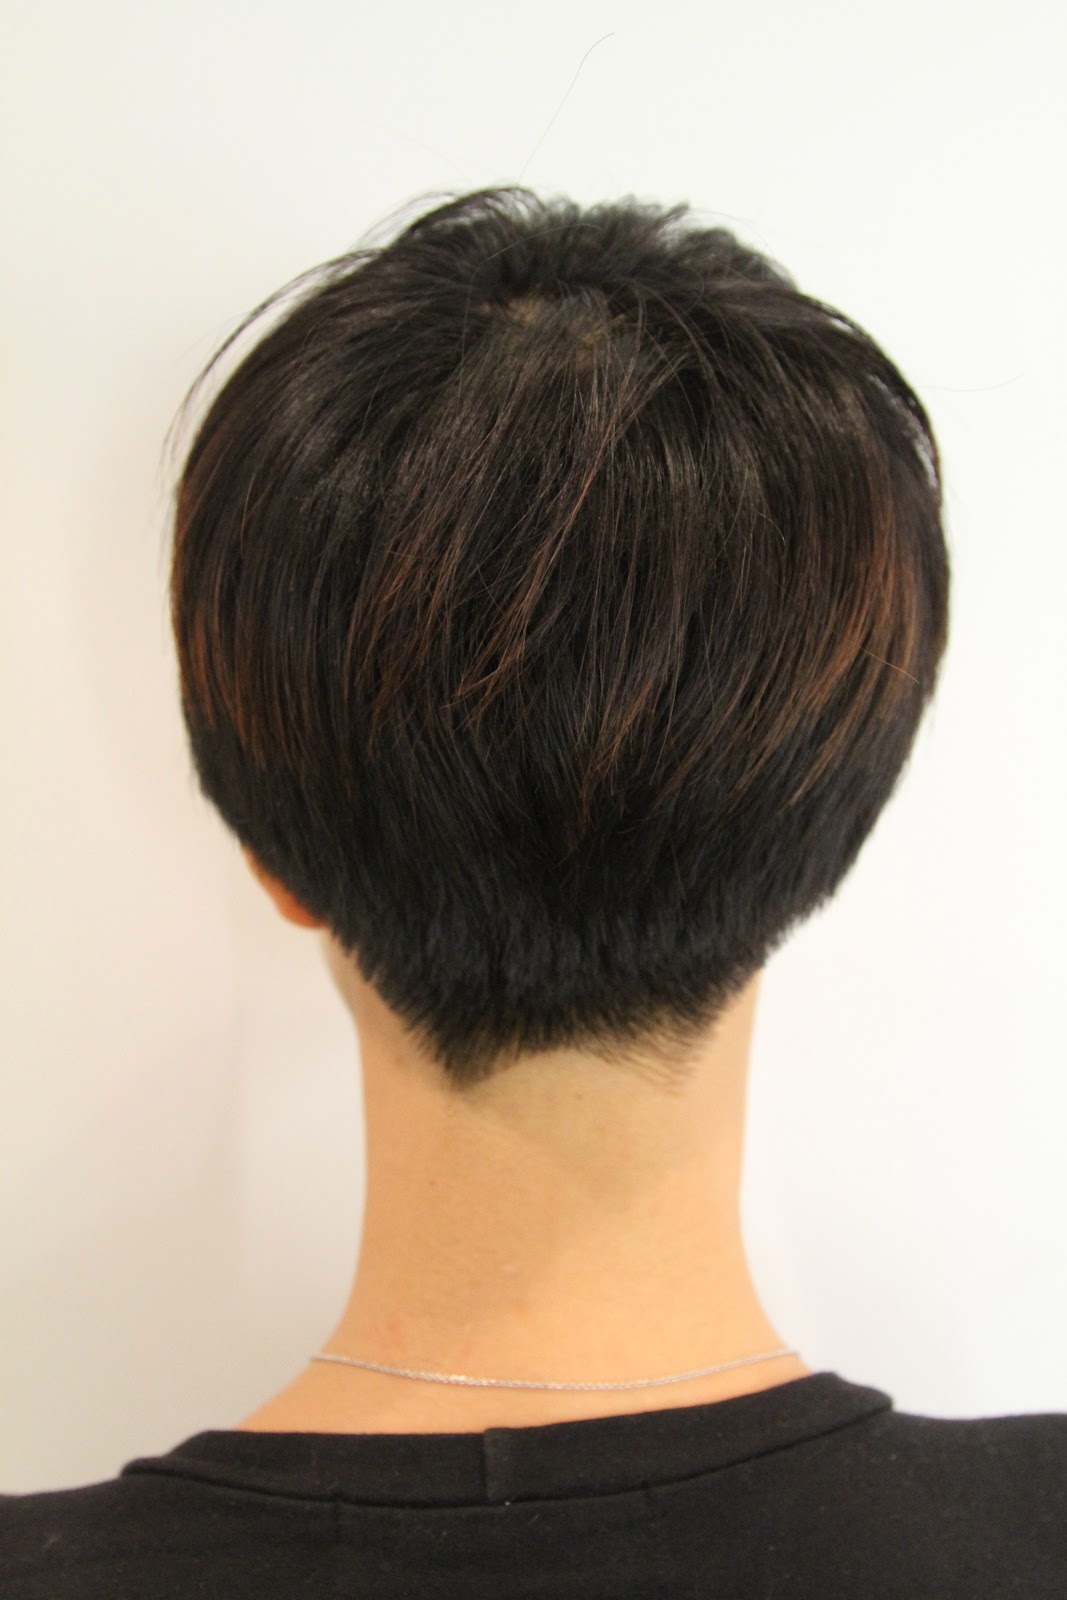 Clippered Bob Nape Shave Shaved Short Hair Hairstyle Style Cut Picture